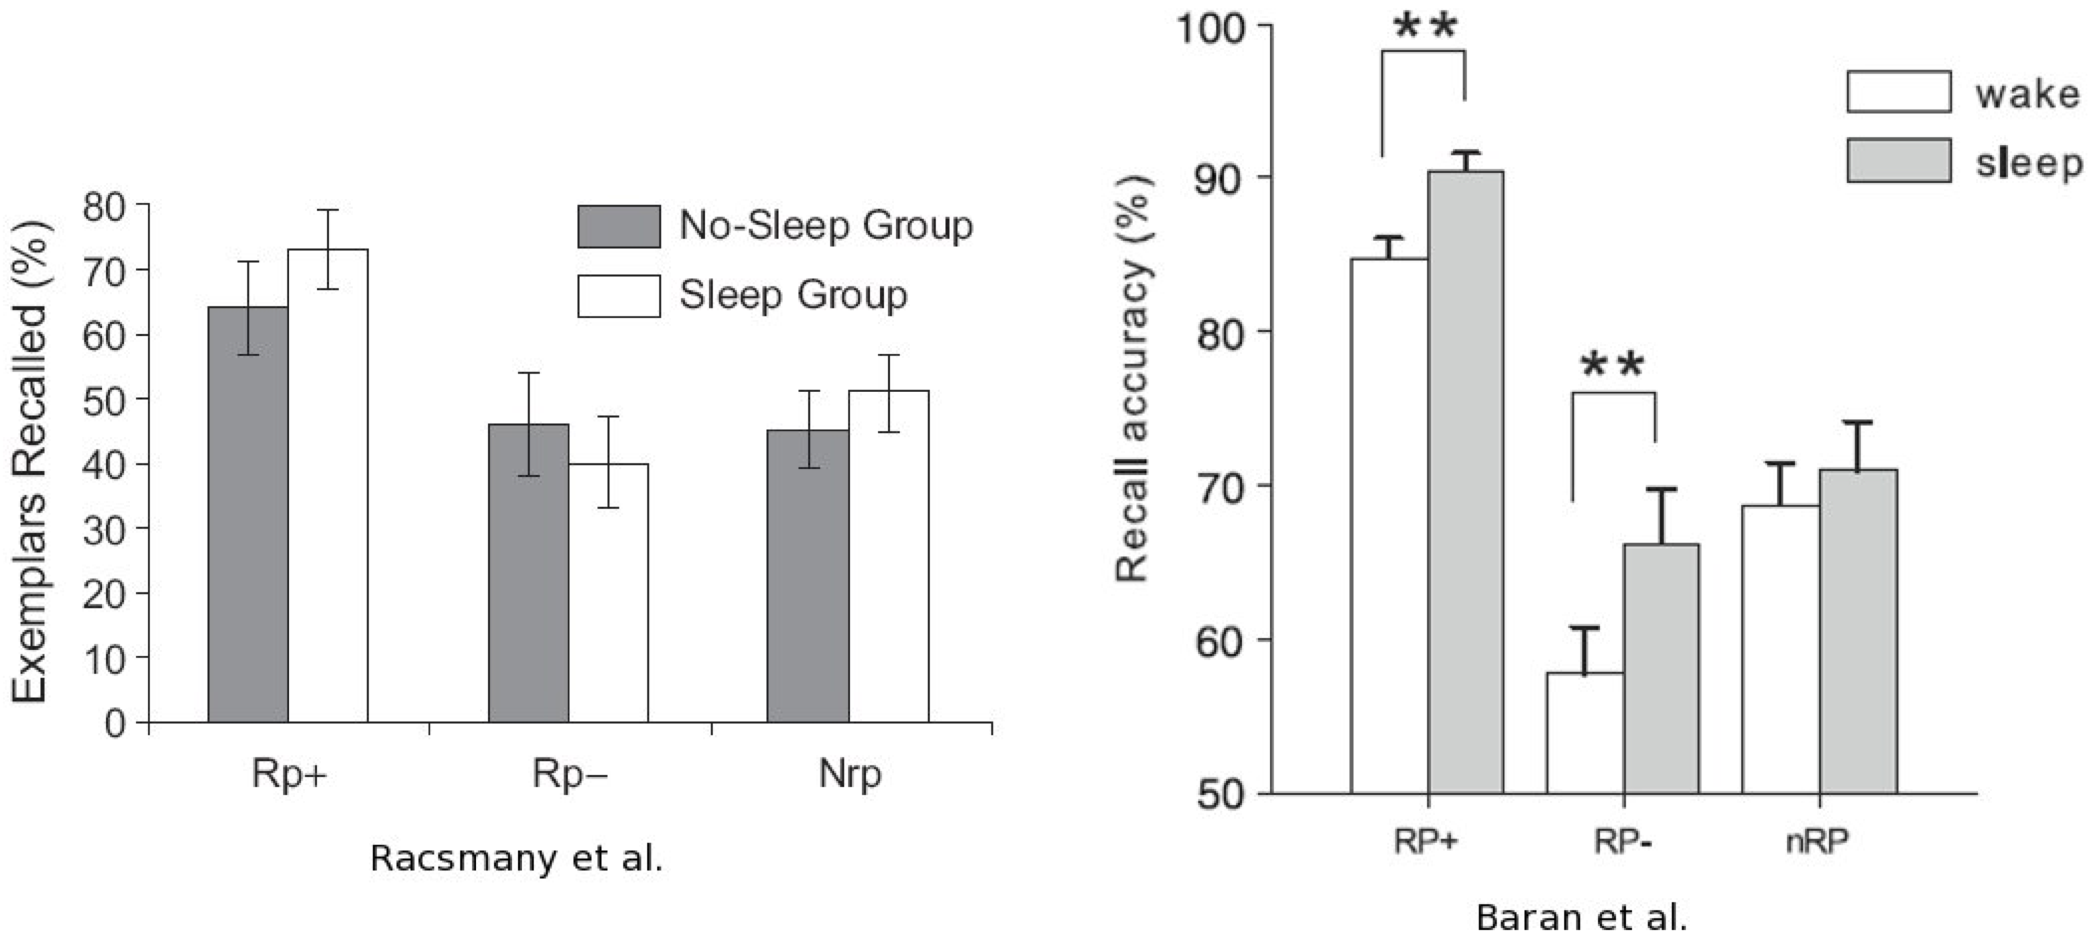 Controversial results concerning the effect of sleep on retrieval-induced forgetting.